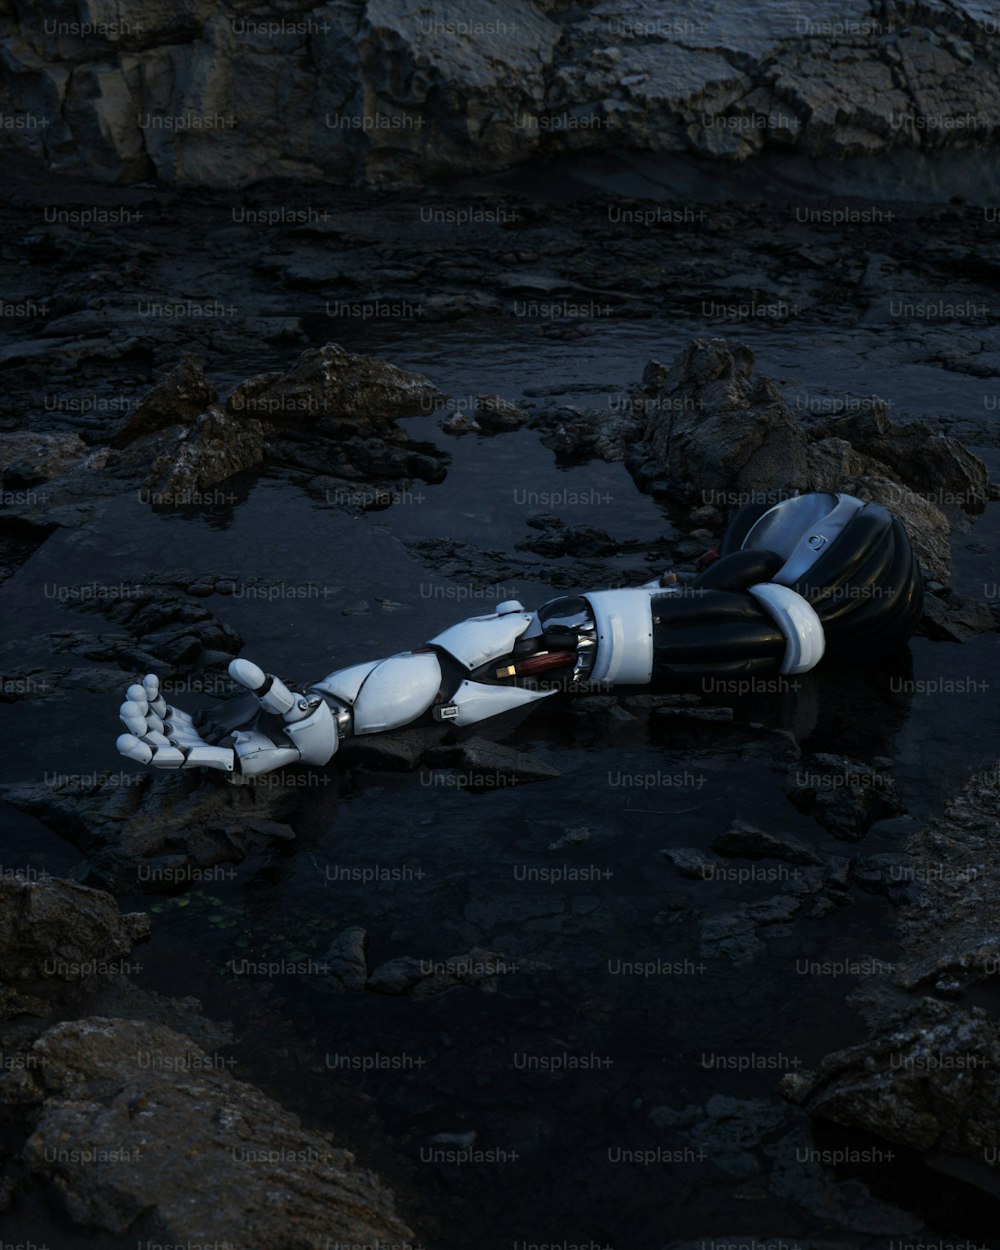 a robot is laying on the rocks in the water